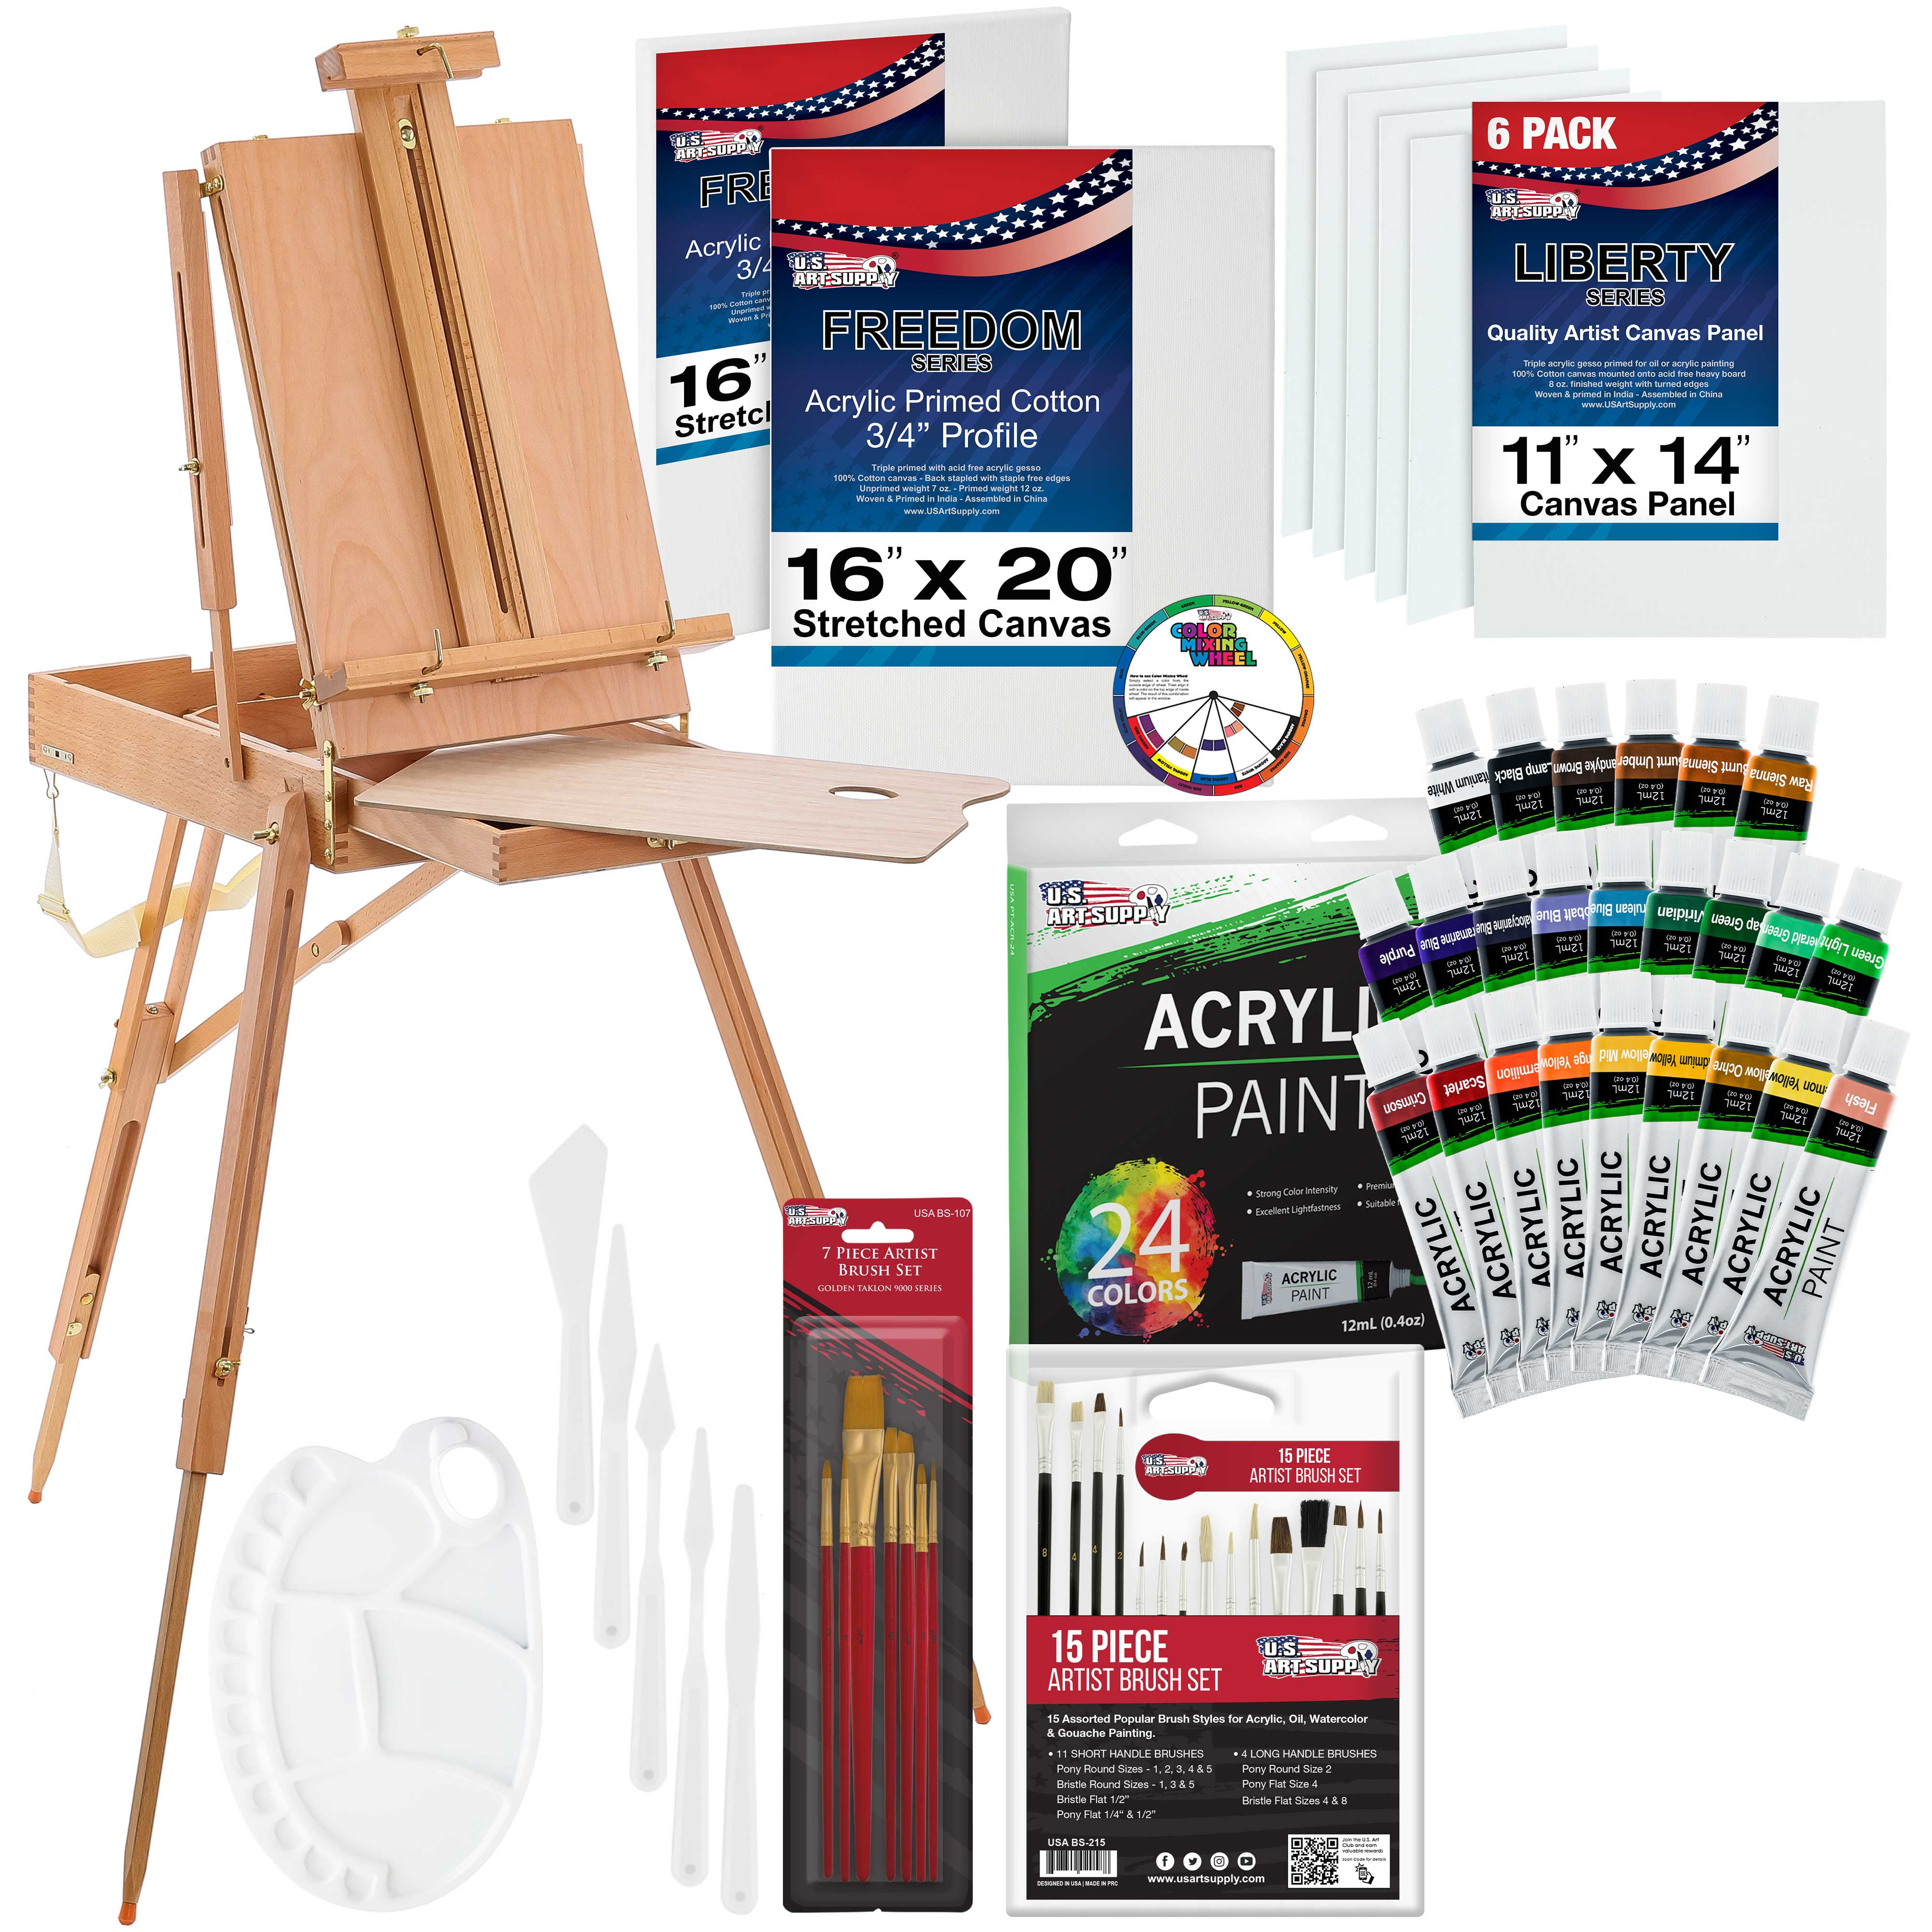 U.S. Art Supply 62-Piece Artist Acrylic Painting Set with Coronado French Style Sketch Box Easel, 24 Acrylic Paint Colors, 22 Brushes, 2 Stretched